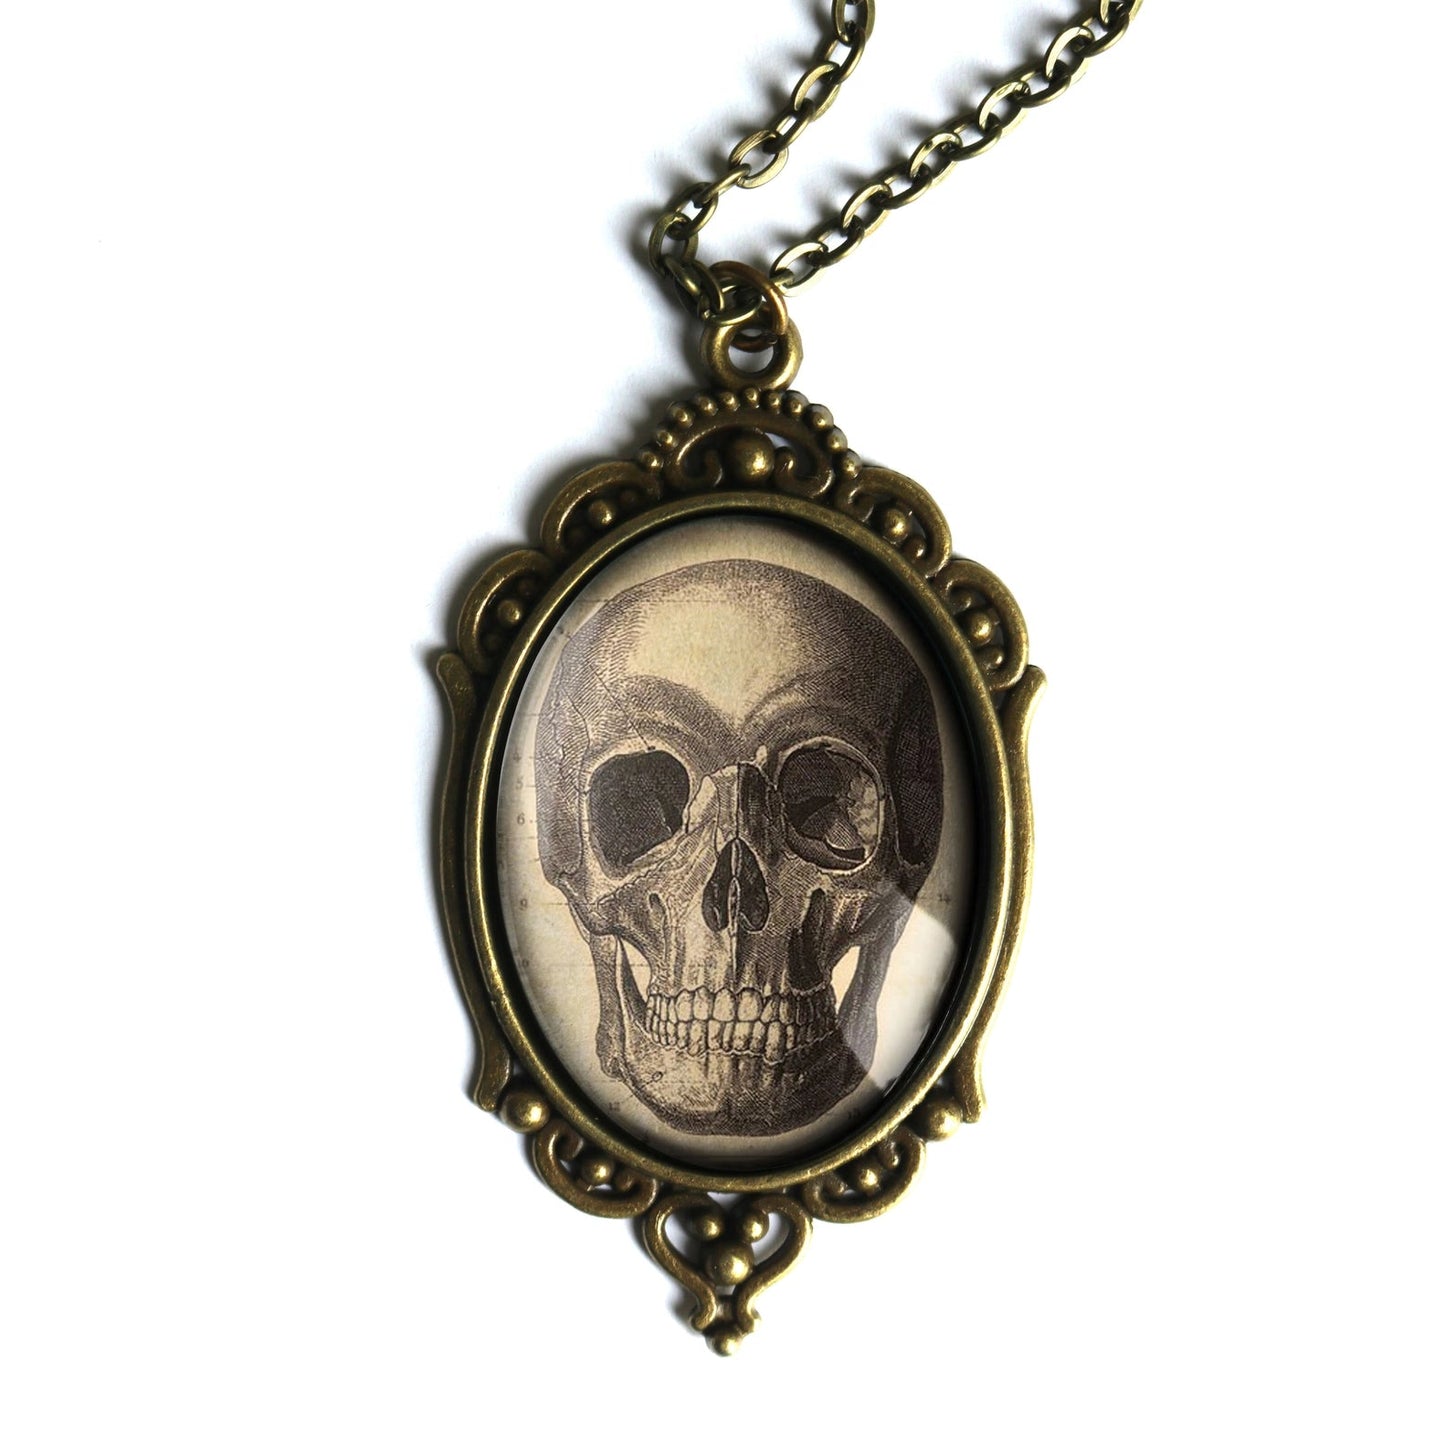 Old Skull Ornate Oval Pendant Necklace | Handmade in the US